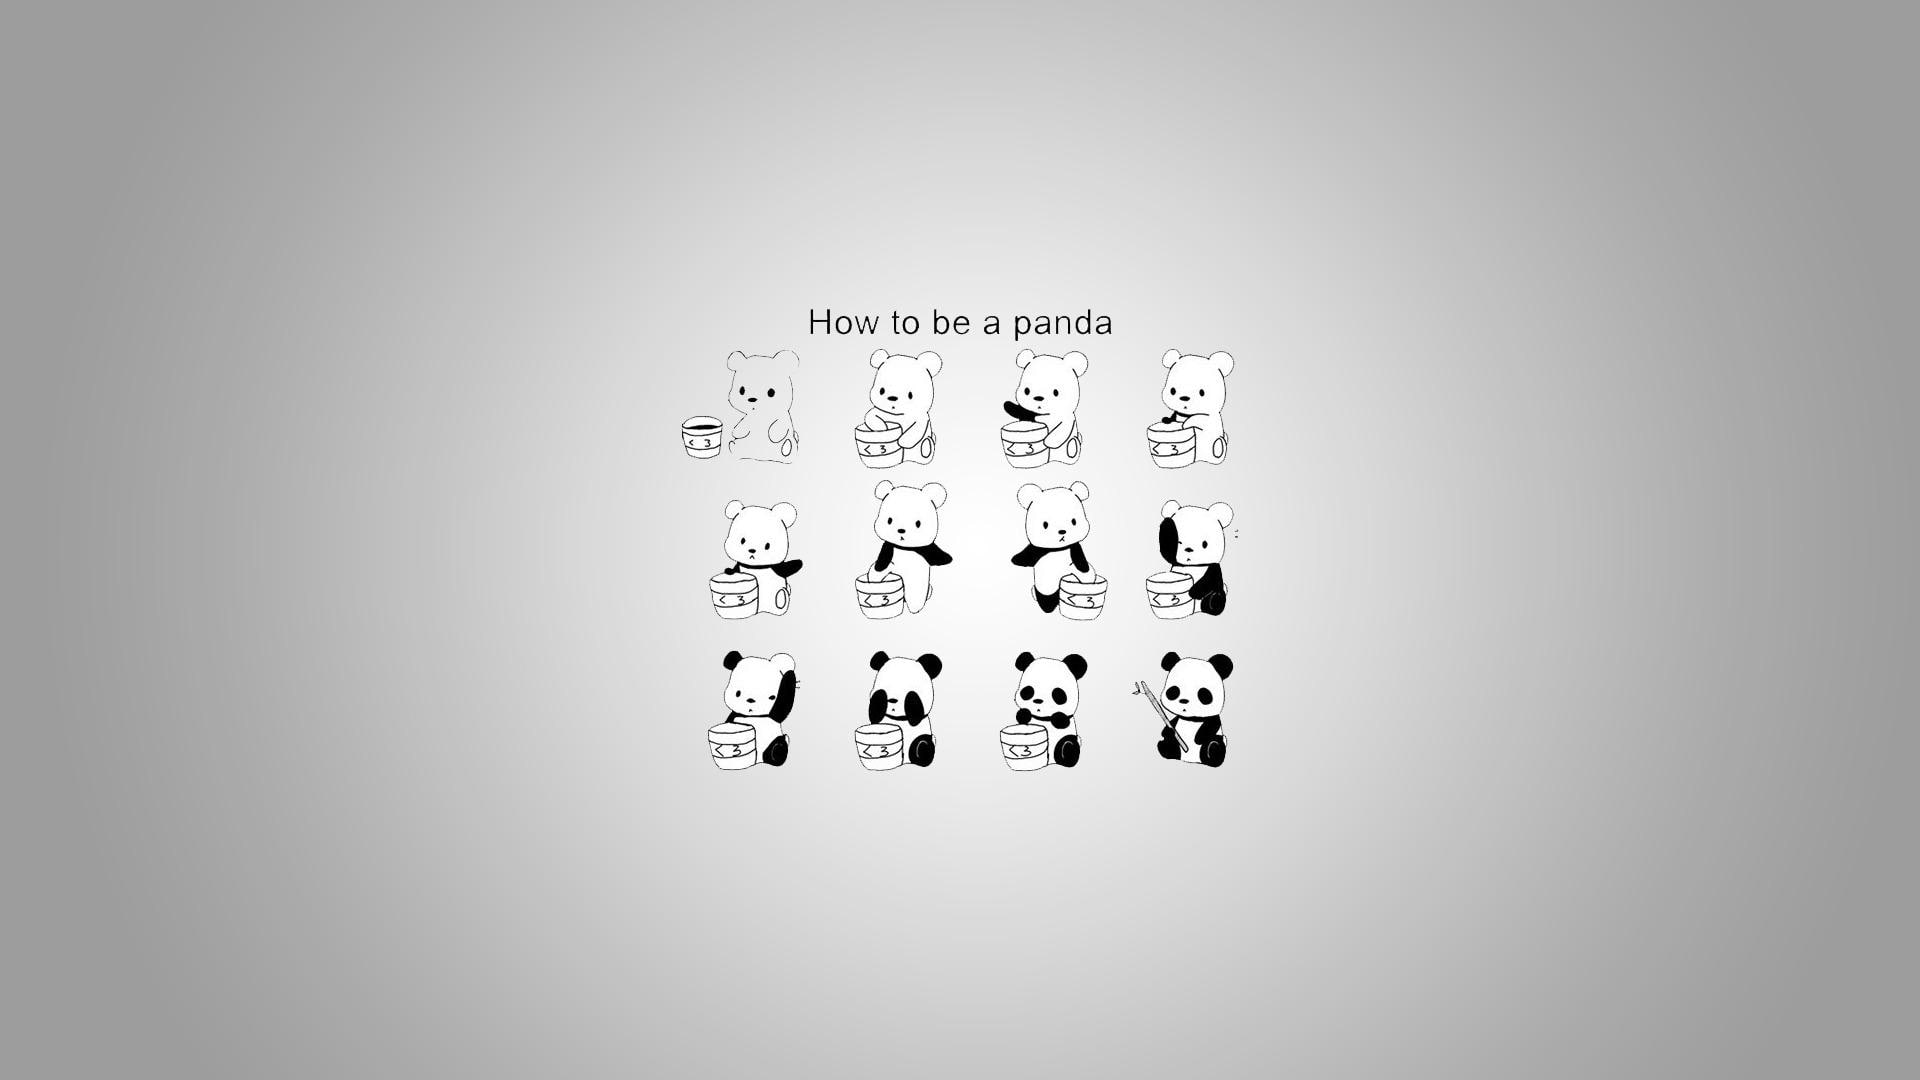 How to be a panda, how to be a panda illustration, funny, 1920x1080